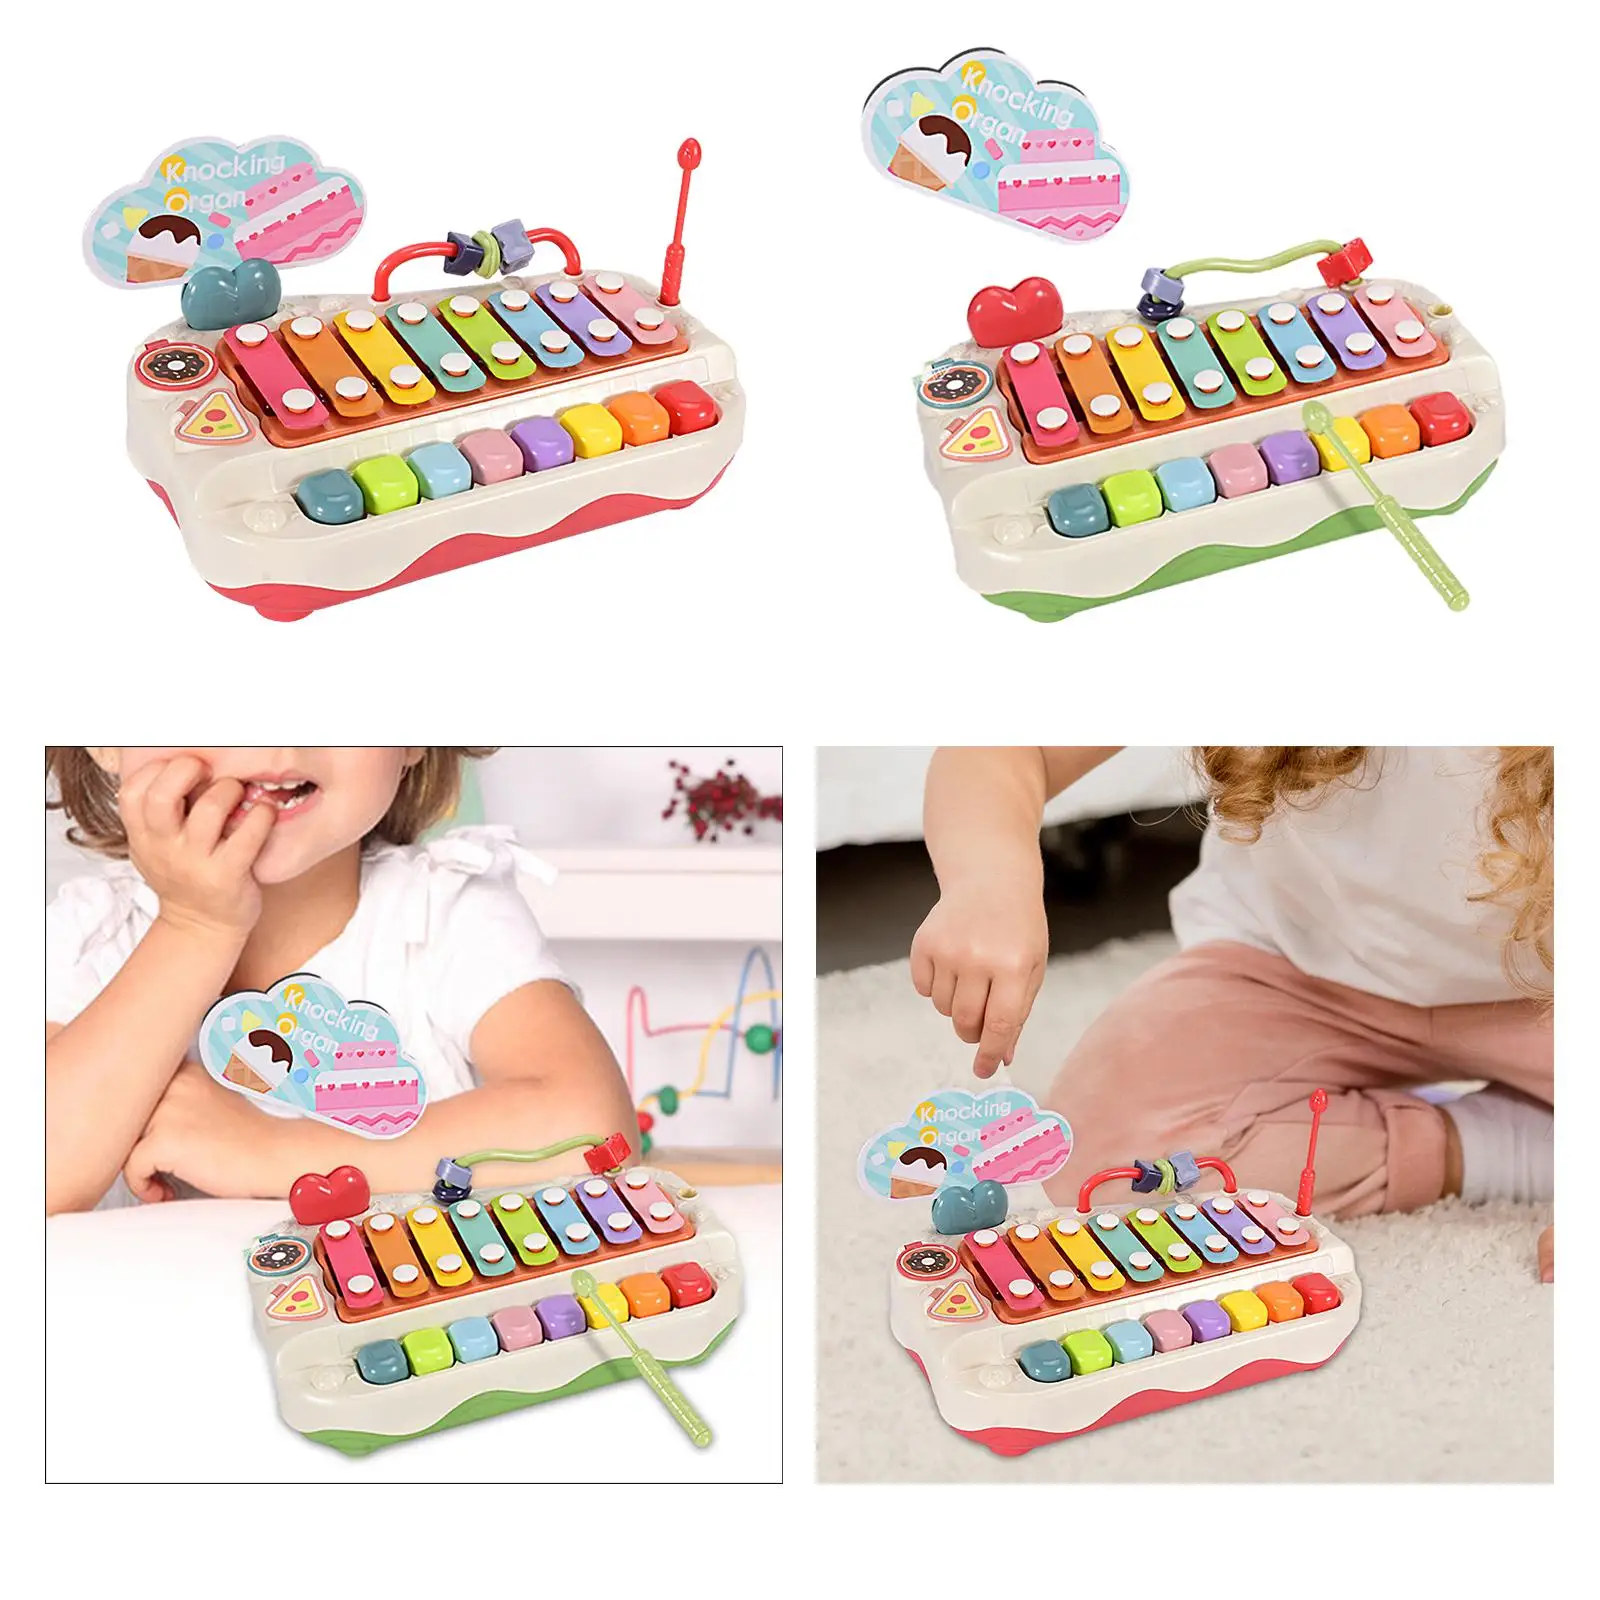 Kids Musical Toy Learning Toy Piano Toy Baby Piano Xylophone Toy for Toddler Baby 1 2 3 Years Old Kids Boy Girls Birthday Gift